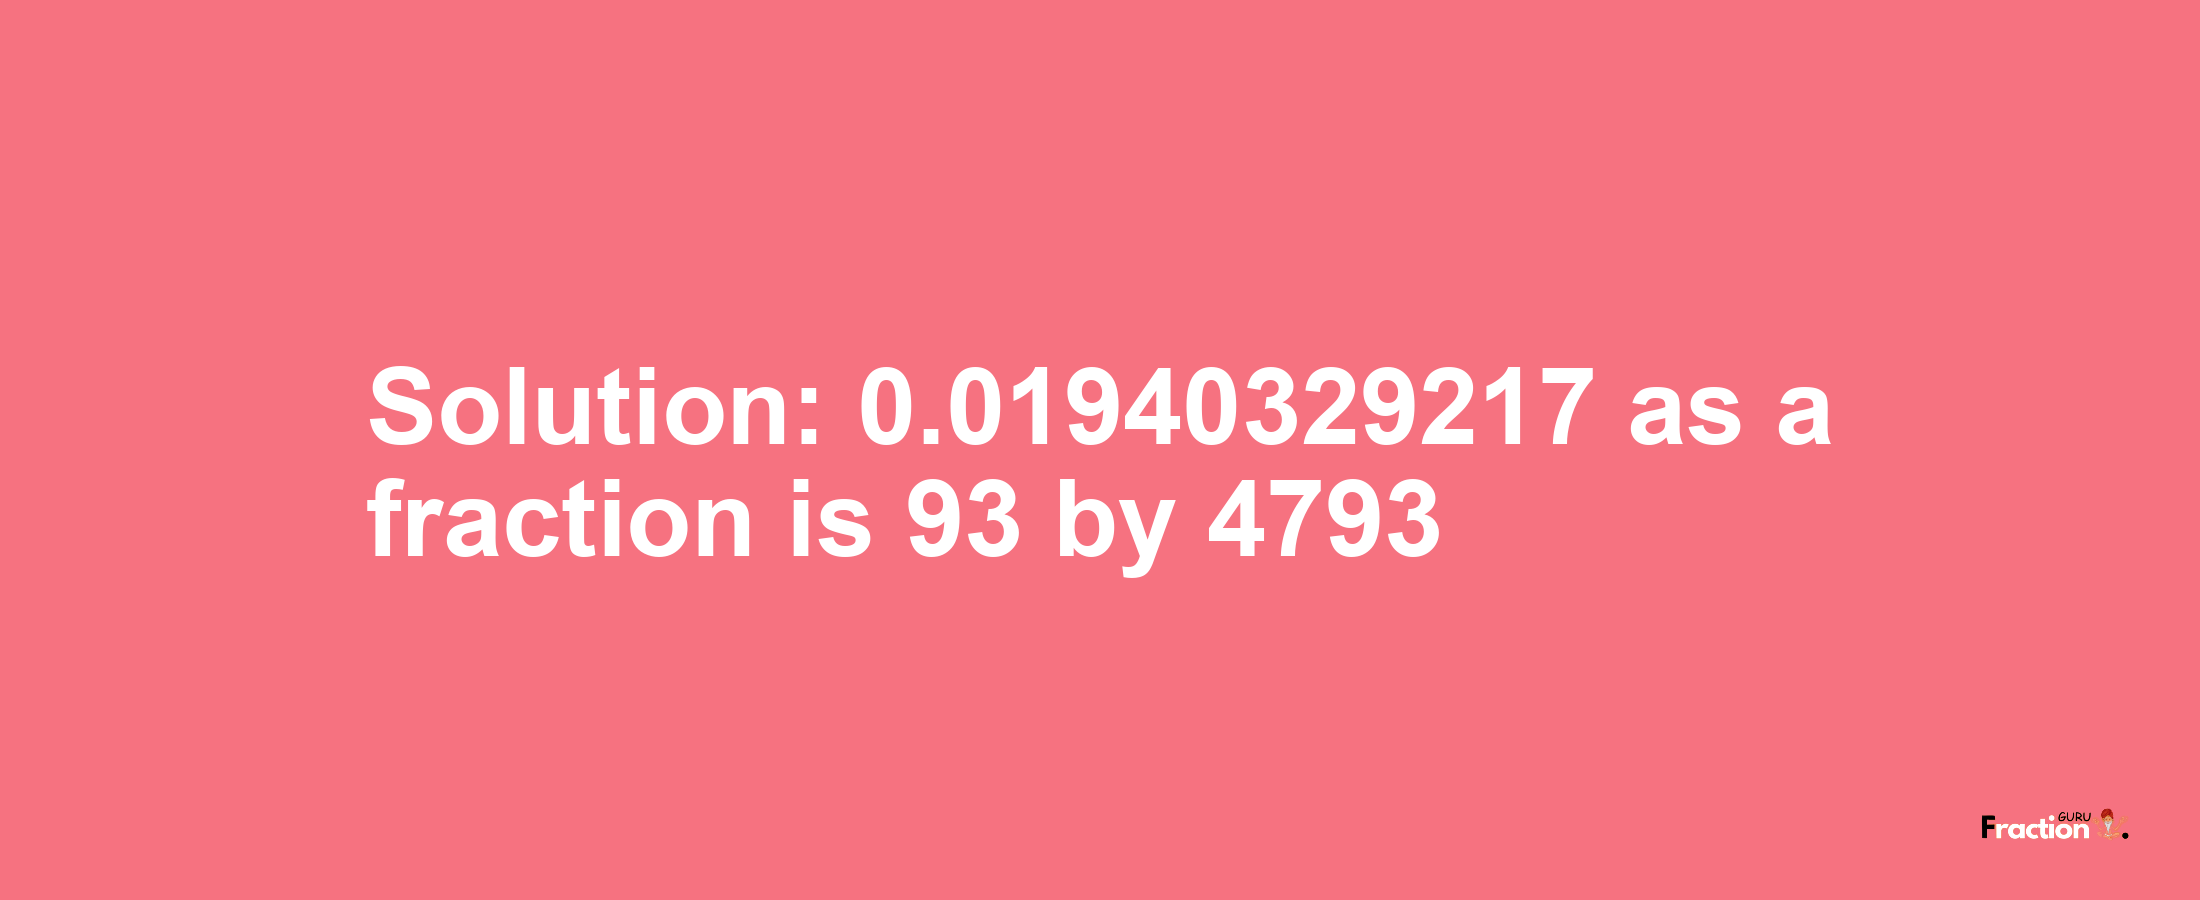 Solution:0.01940329217 as a fraction is 93/4793